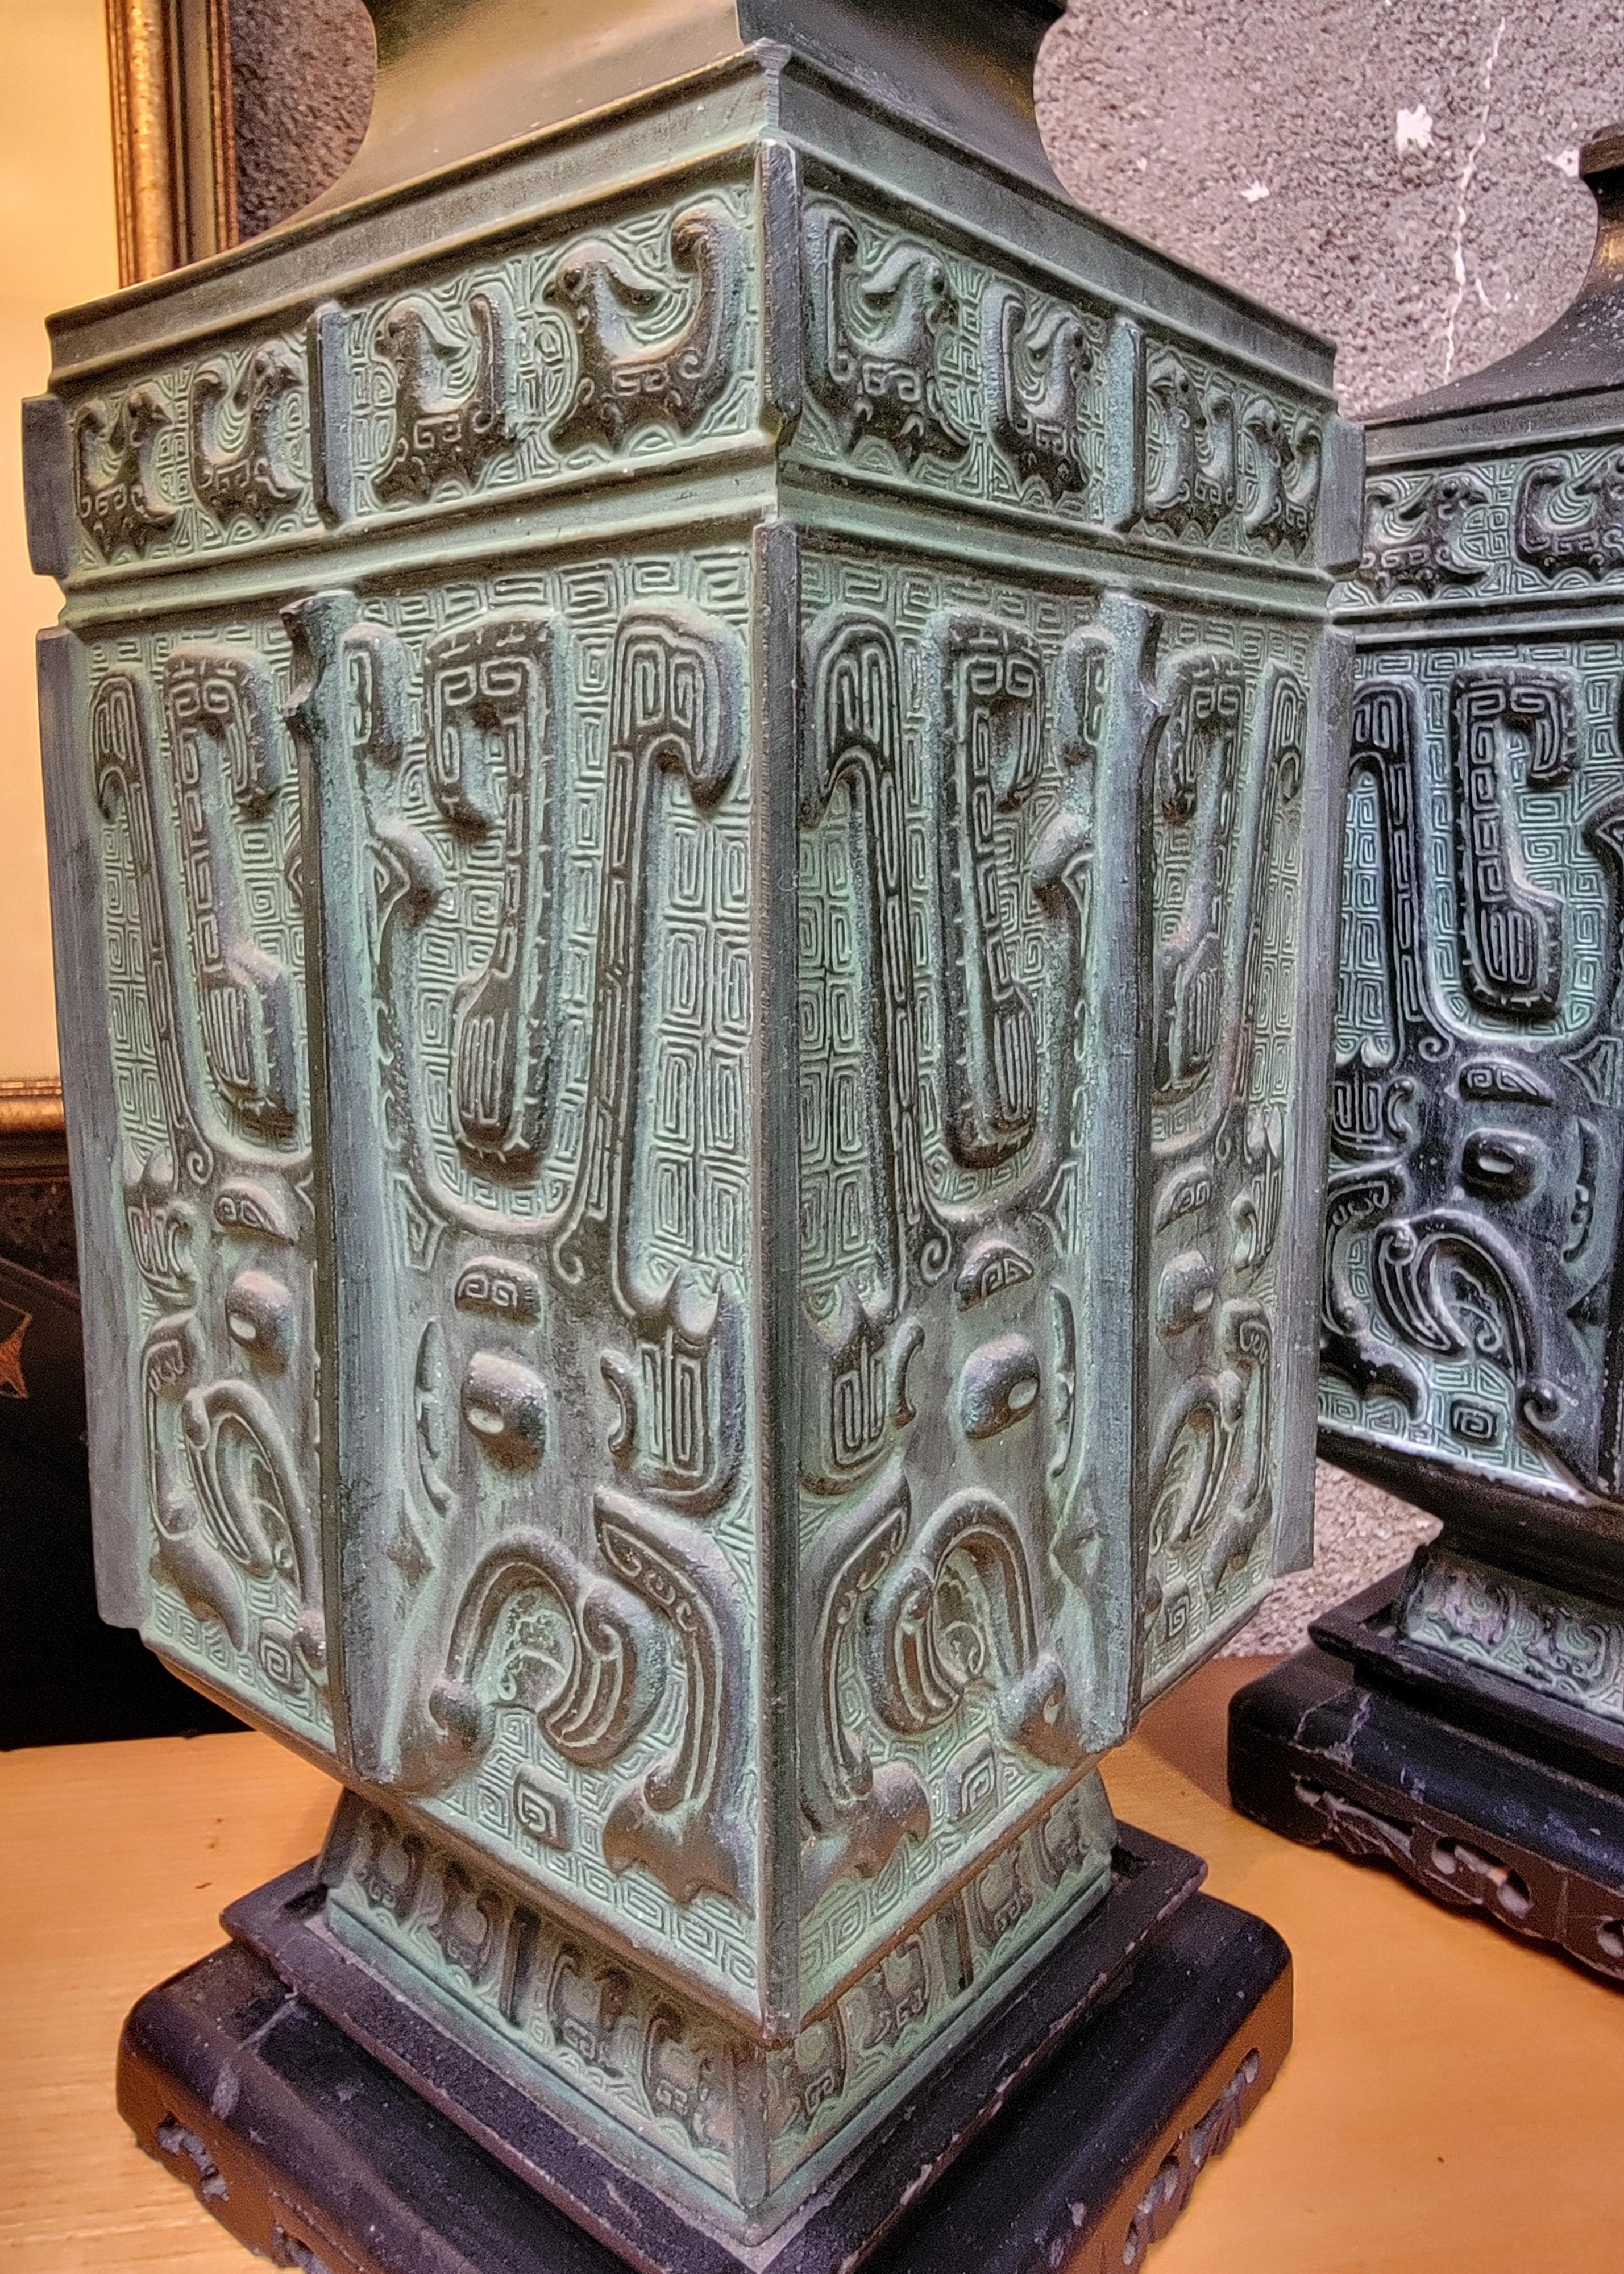 A unique pair of cast metal table lamps. They are heavy cast metal with a bronze like patina. Each lamp is mounted to an Asian style wood base. The design appears to be similar to a hieroglyphic pattern or possibly an Asian design. Pattern is on all